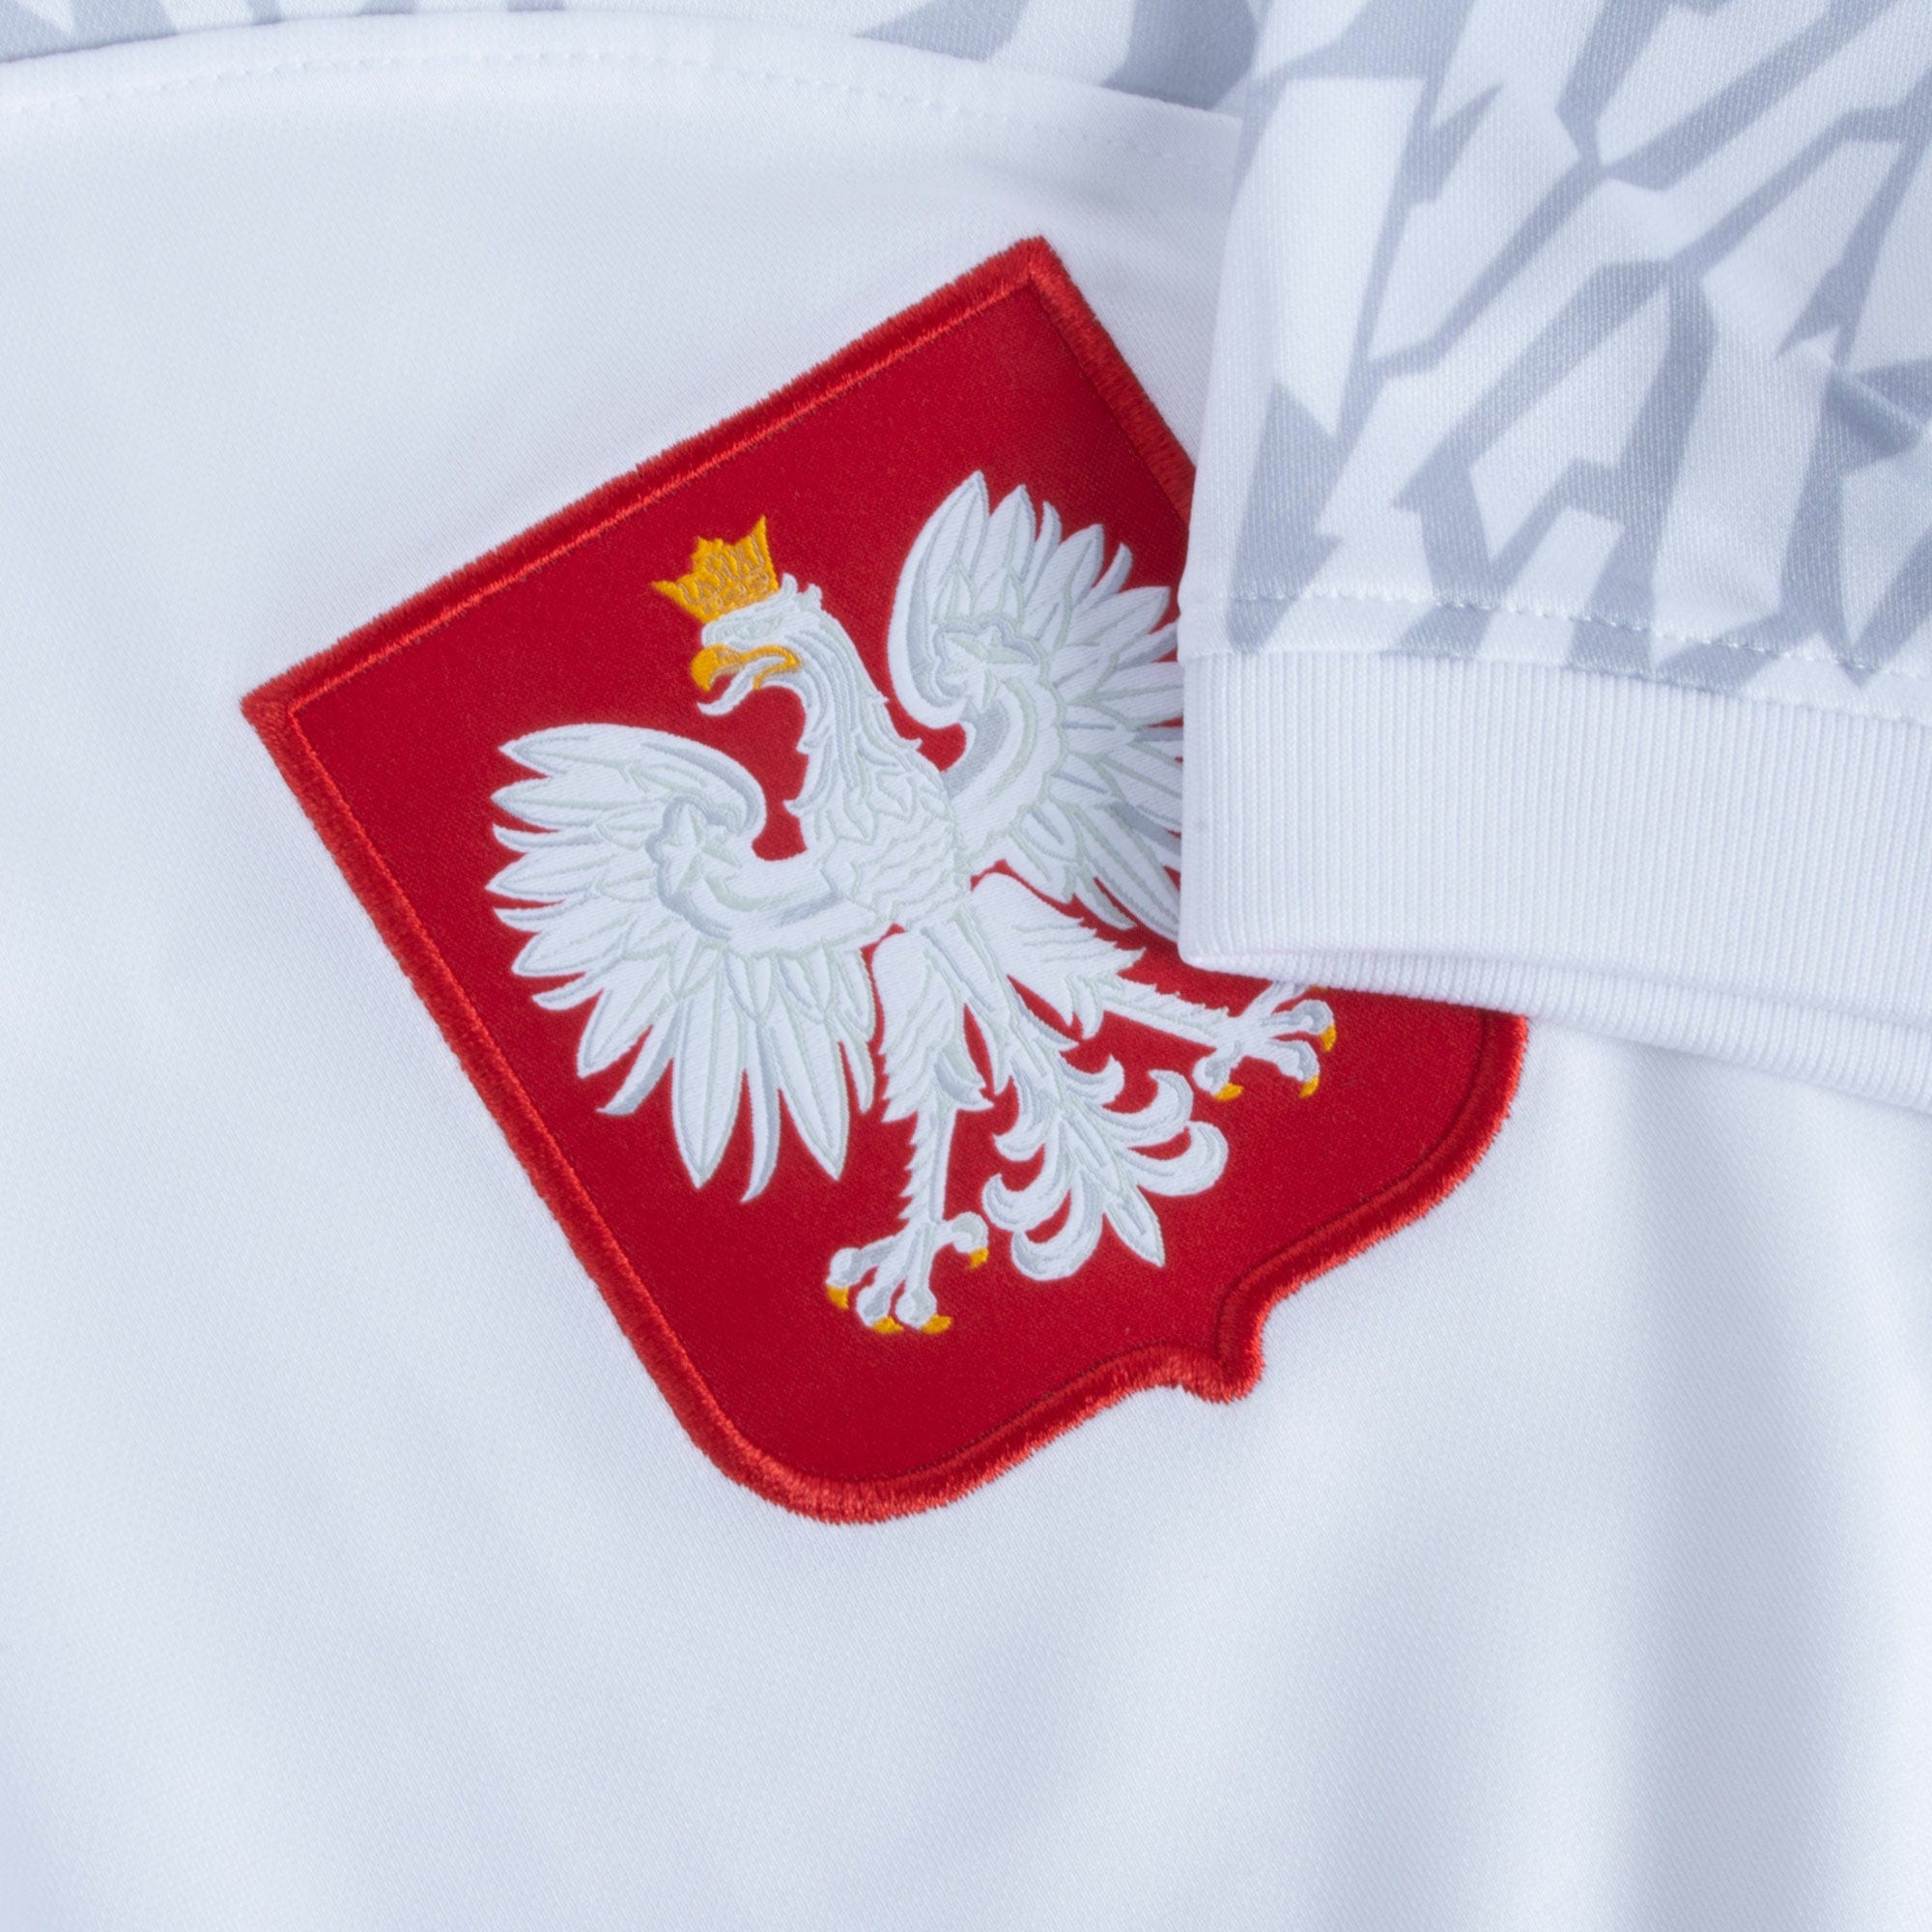 Poland Home Jersey 22/23 Euro 2024 Qualification